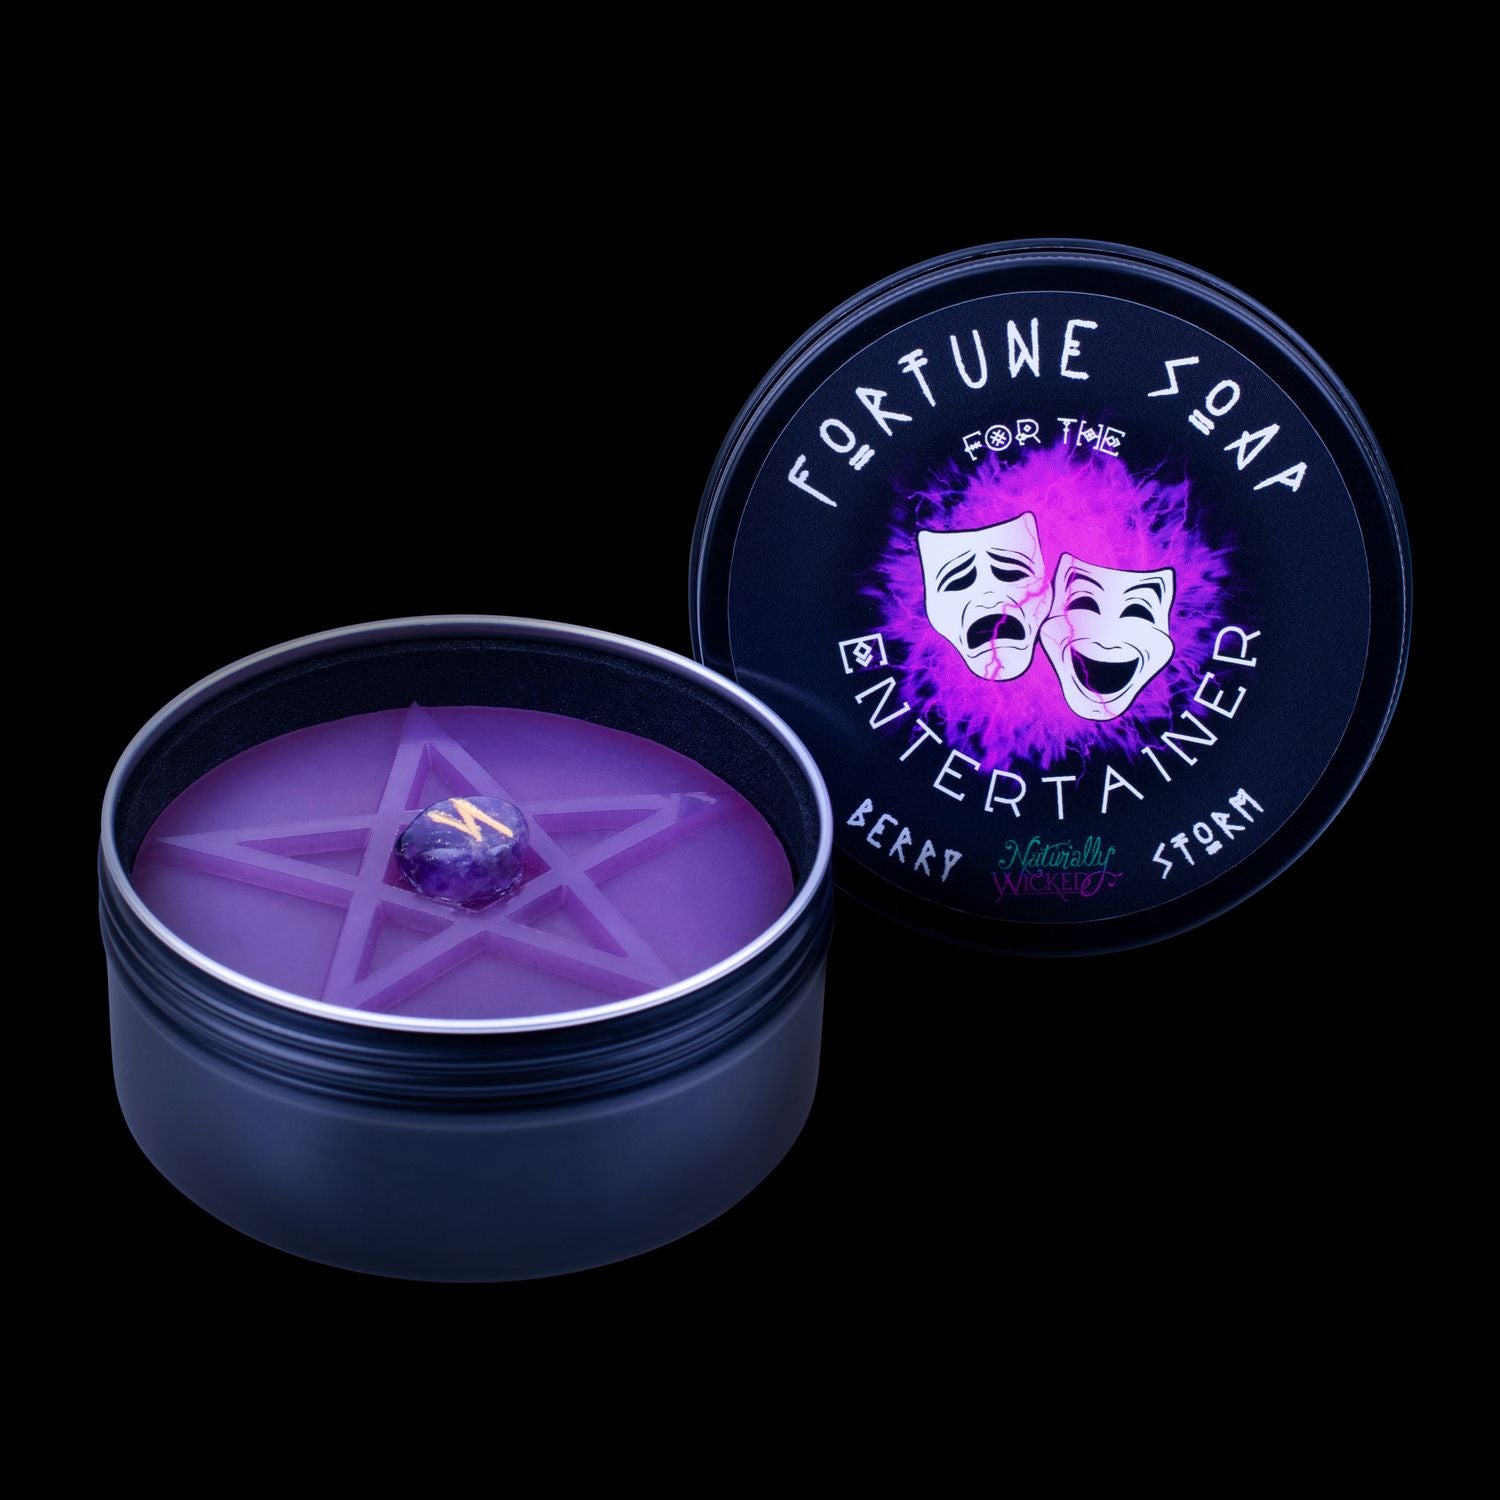 Naturally Wicked Fortune Soap For The Entertainer, Purple Plant-based Soap, Amethyst Crystal, Berry Storm Scent & Black Gloss Gift Tin Included.